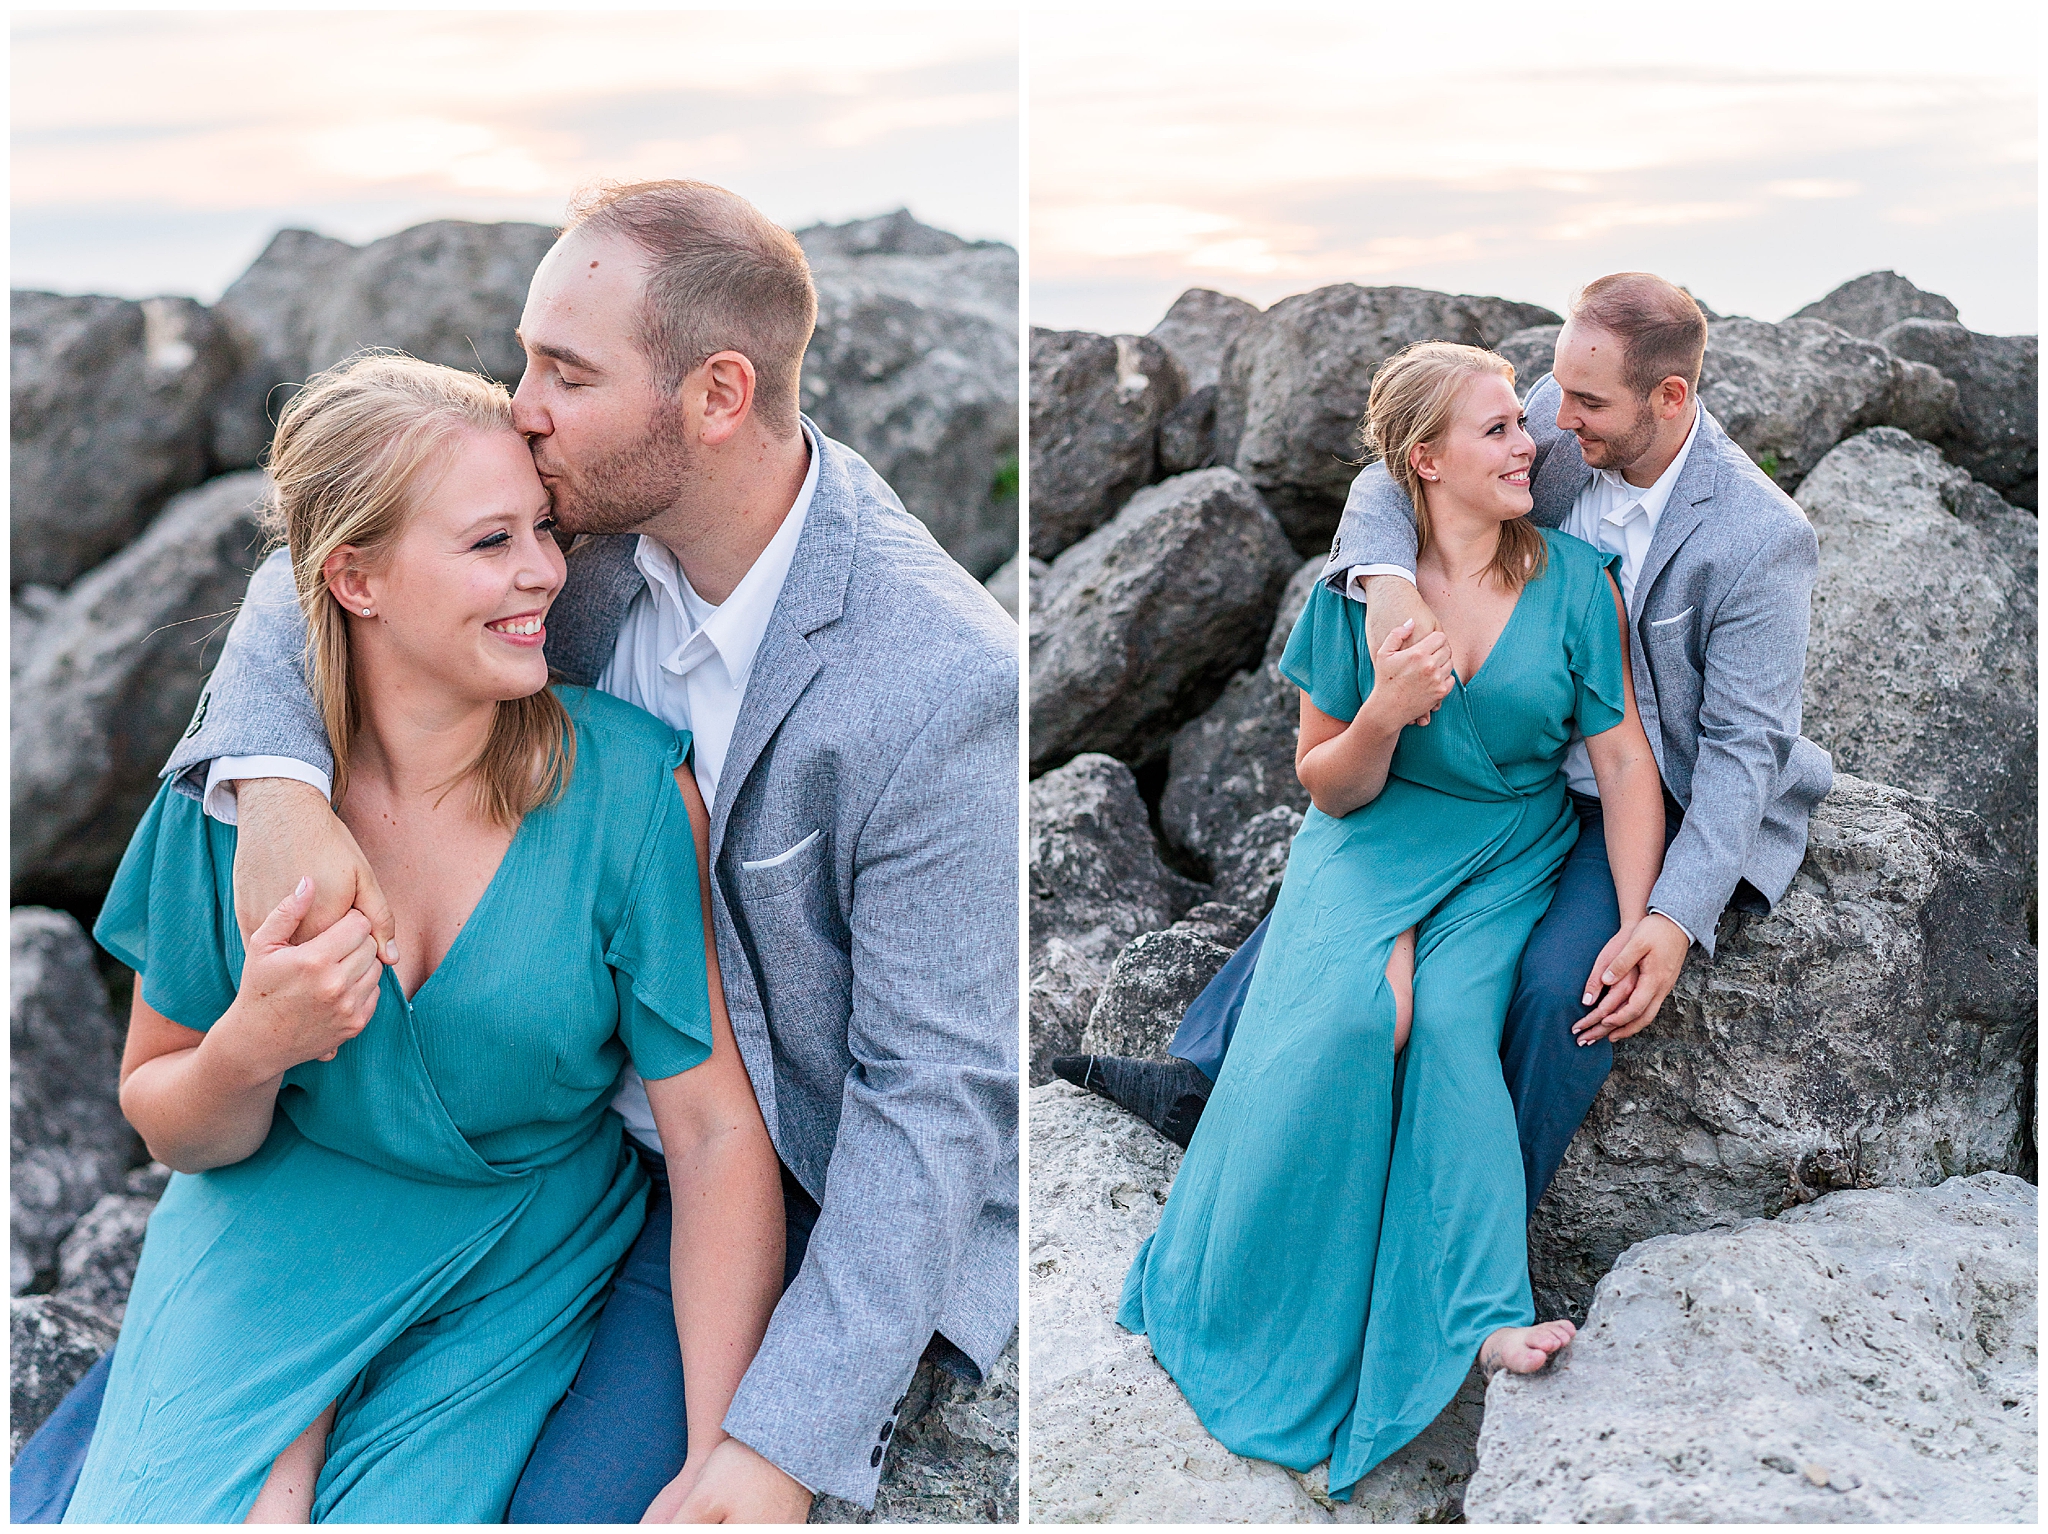 Romantic formal engagement portraits at Sims Park beach in Cleveland Ohio. Woman is wearing a long formal teal gown with flowing sleeves. The man is in a grey suit and white button up shirt. They are looking in each other's eyes and sitting on rock formations on the shore. 